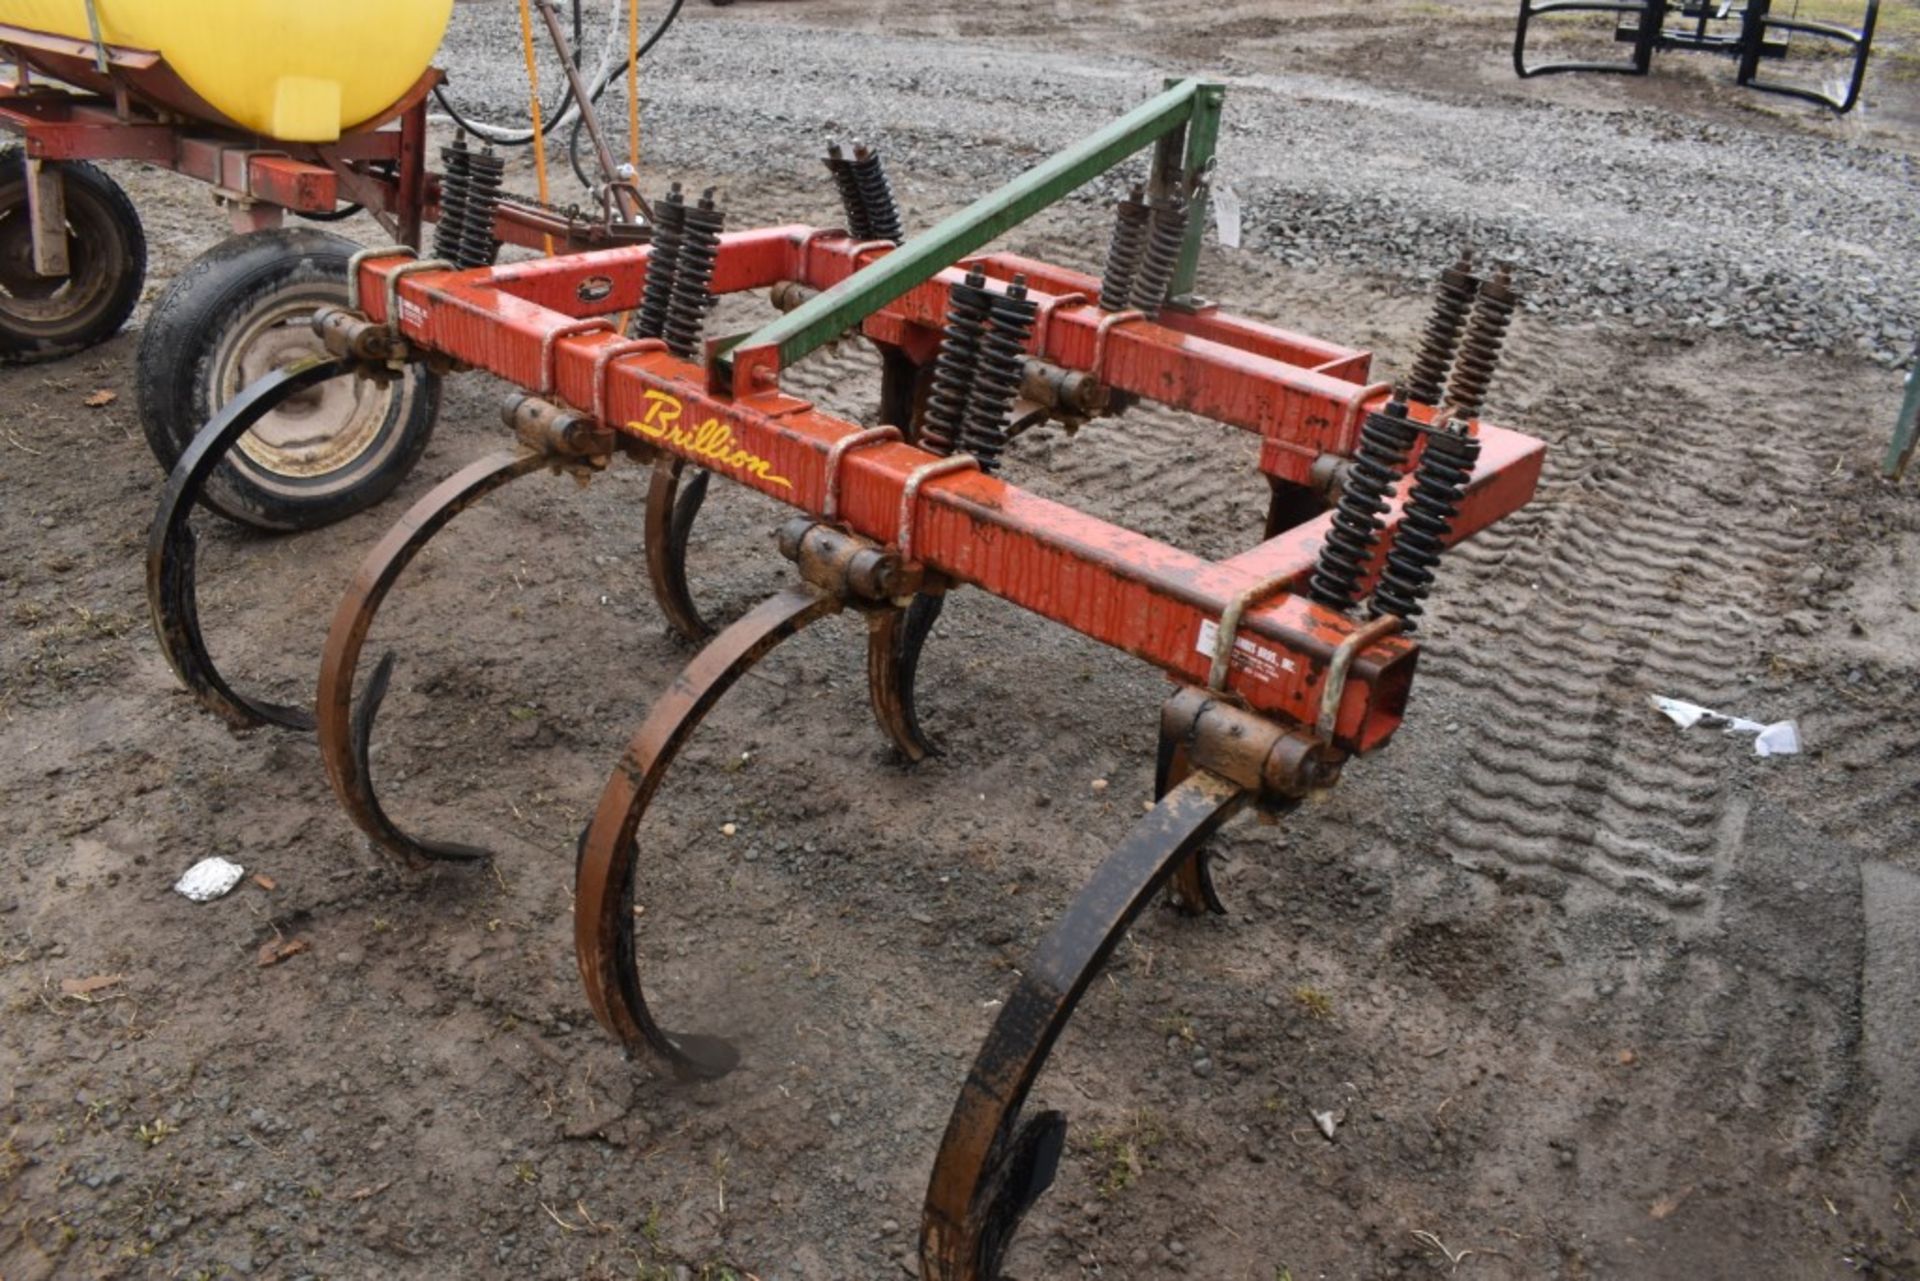 Brillion Cpp-02 7 Shank 3 Point Chisel Plow - Image 6 of 8